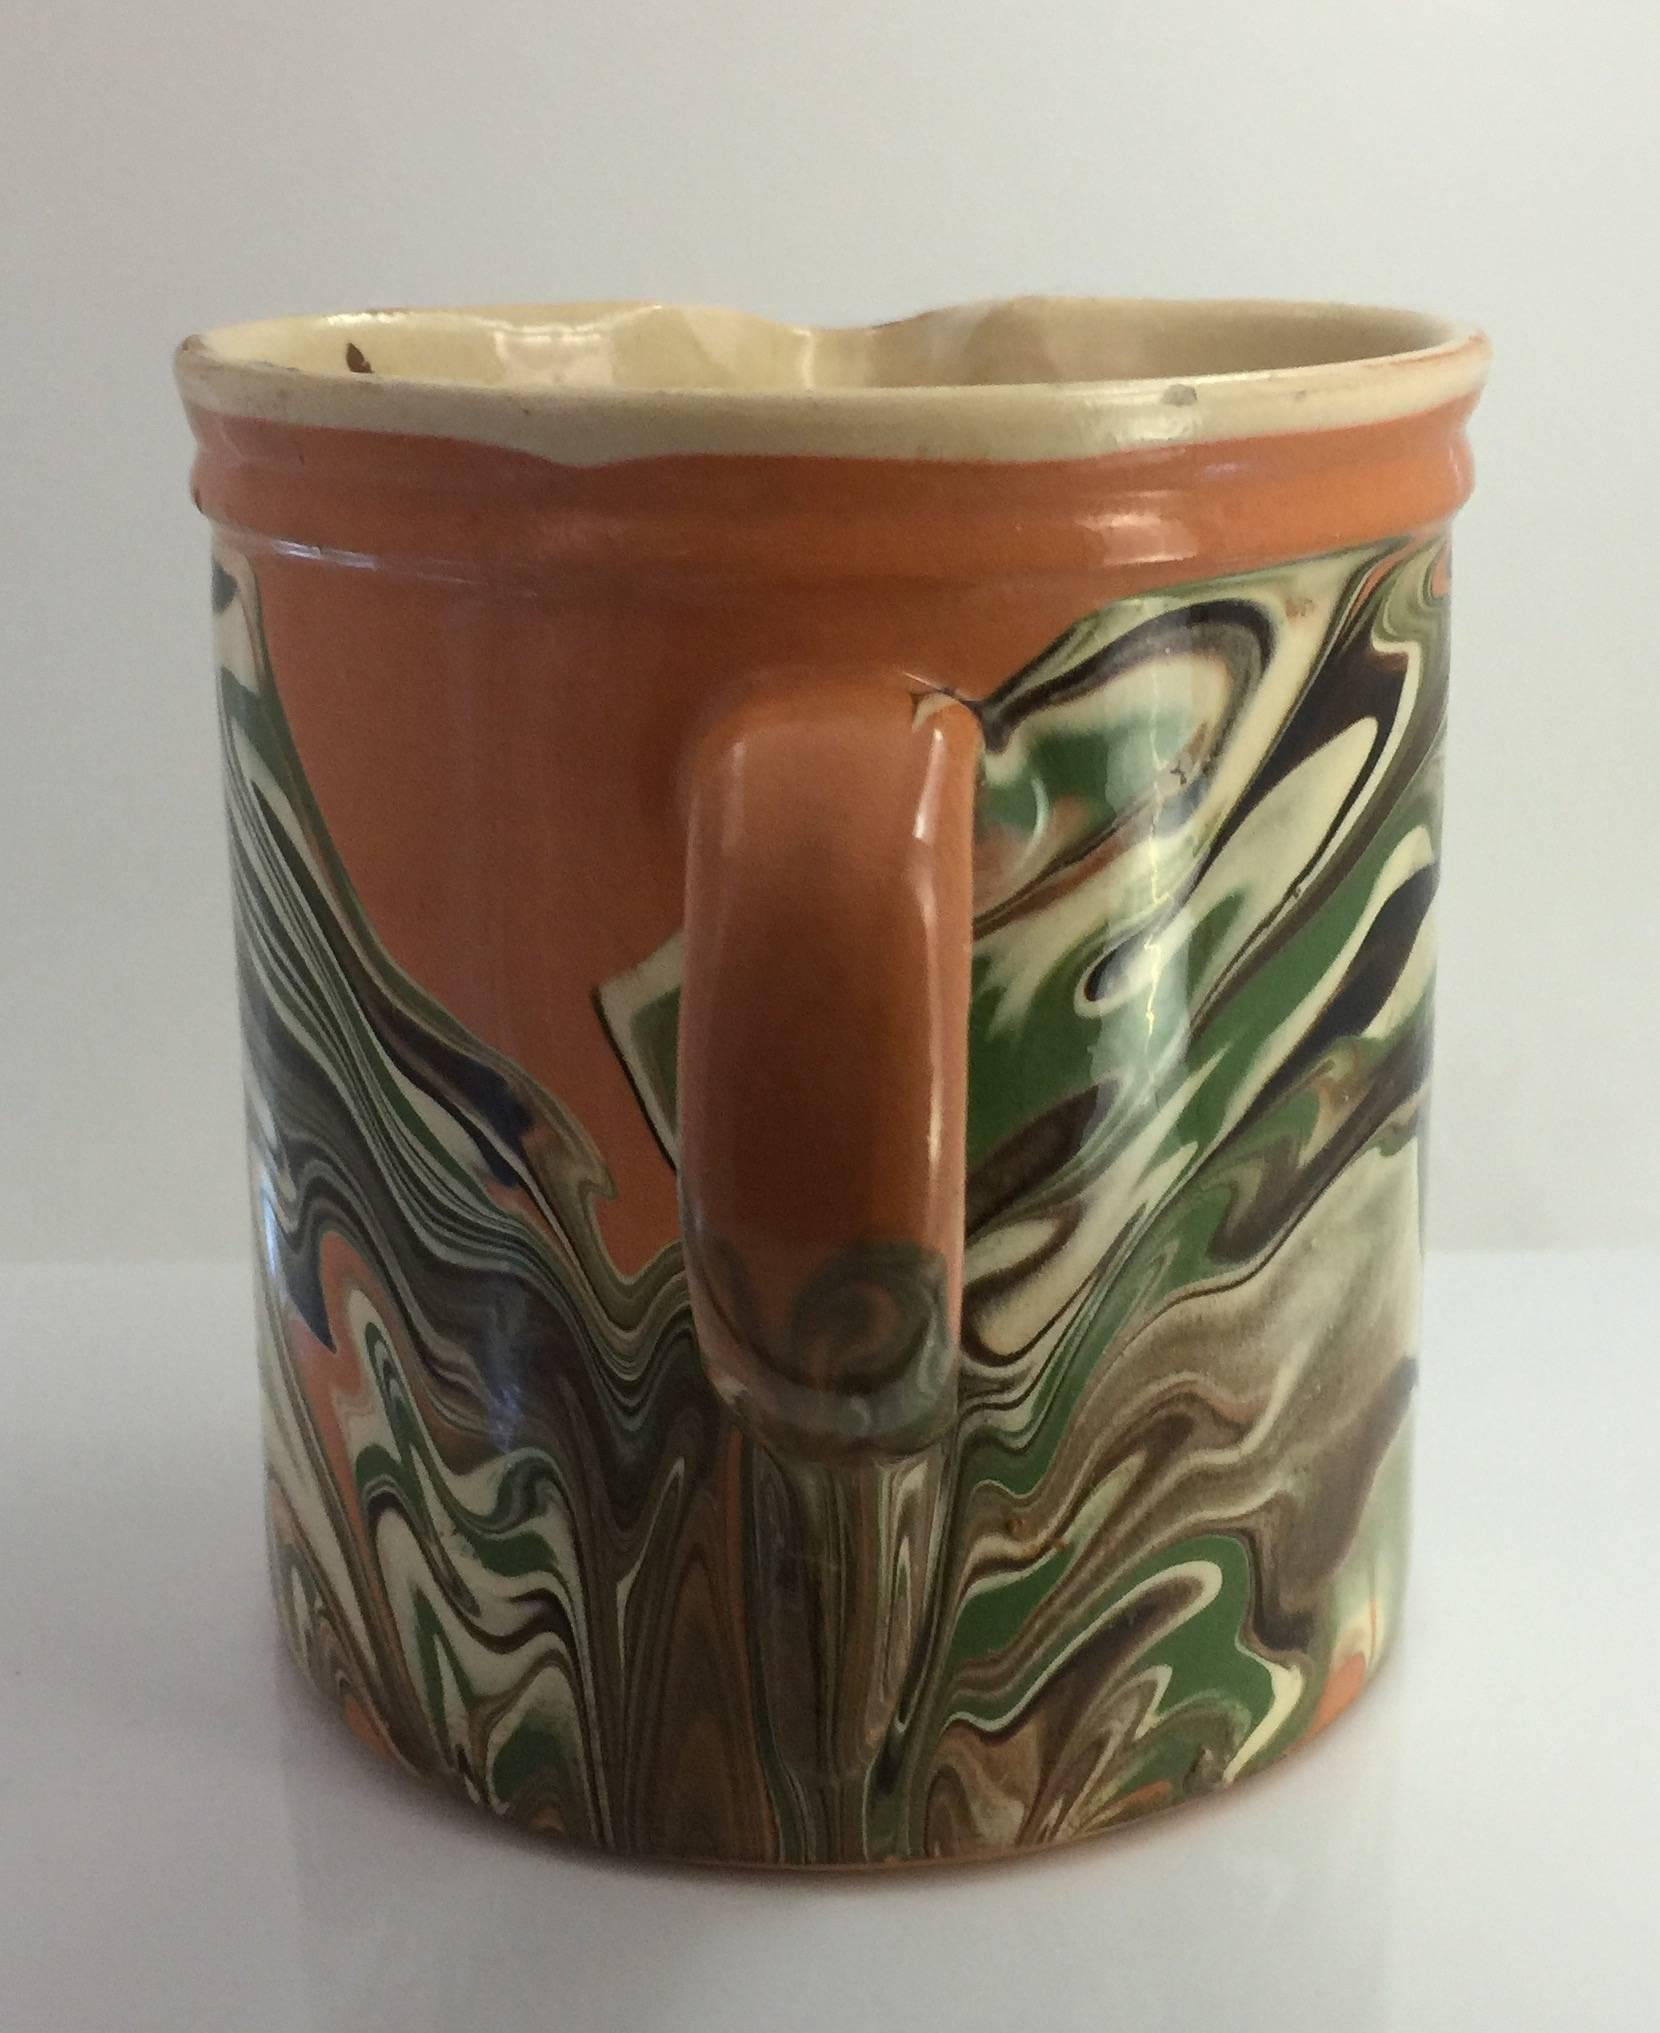 19th century French Jaspe pitcher with marbelized decoration on a peach ground.